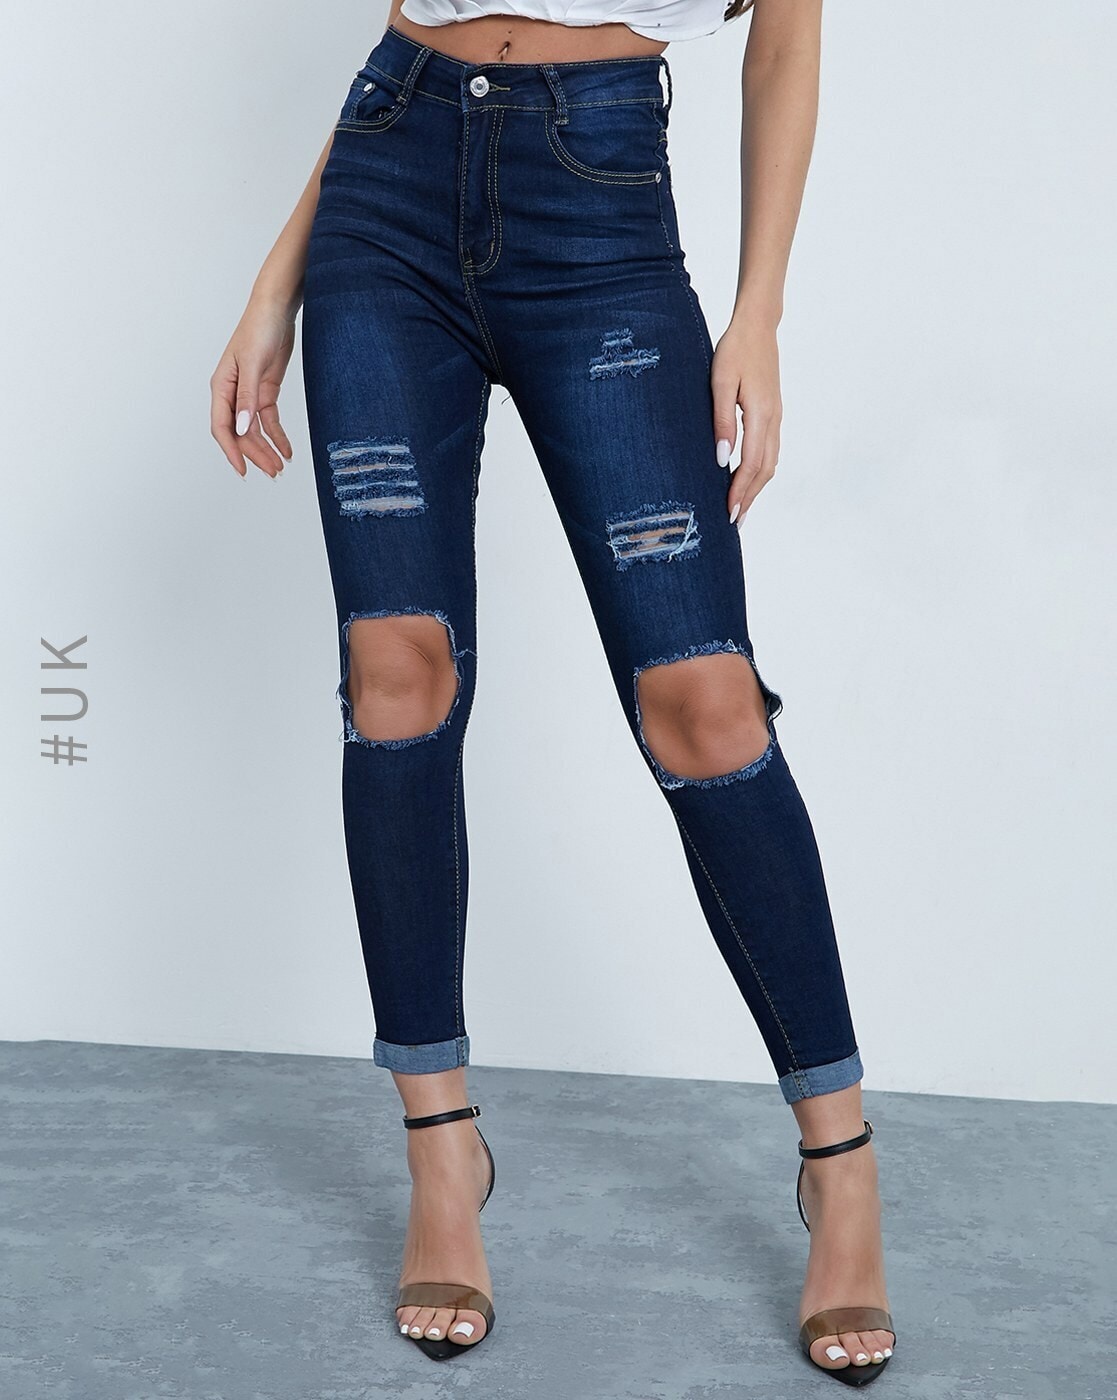 Skinny High Waisted Denim Asymmetrical Jeans With Extreme Slit And Ripped  Details For Women Sexy, Slimming, And Hollow Out Design From Luote, $20.8 |  DHgate.Com